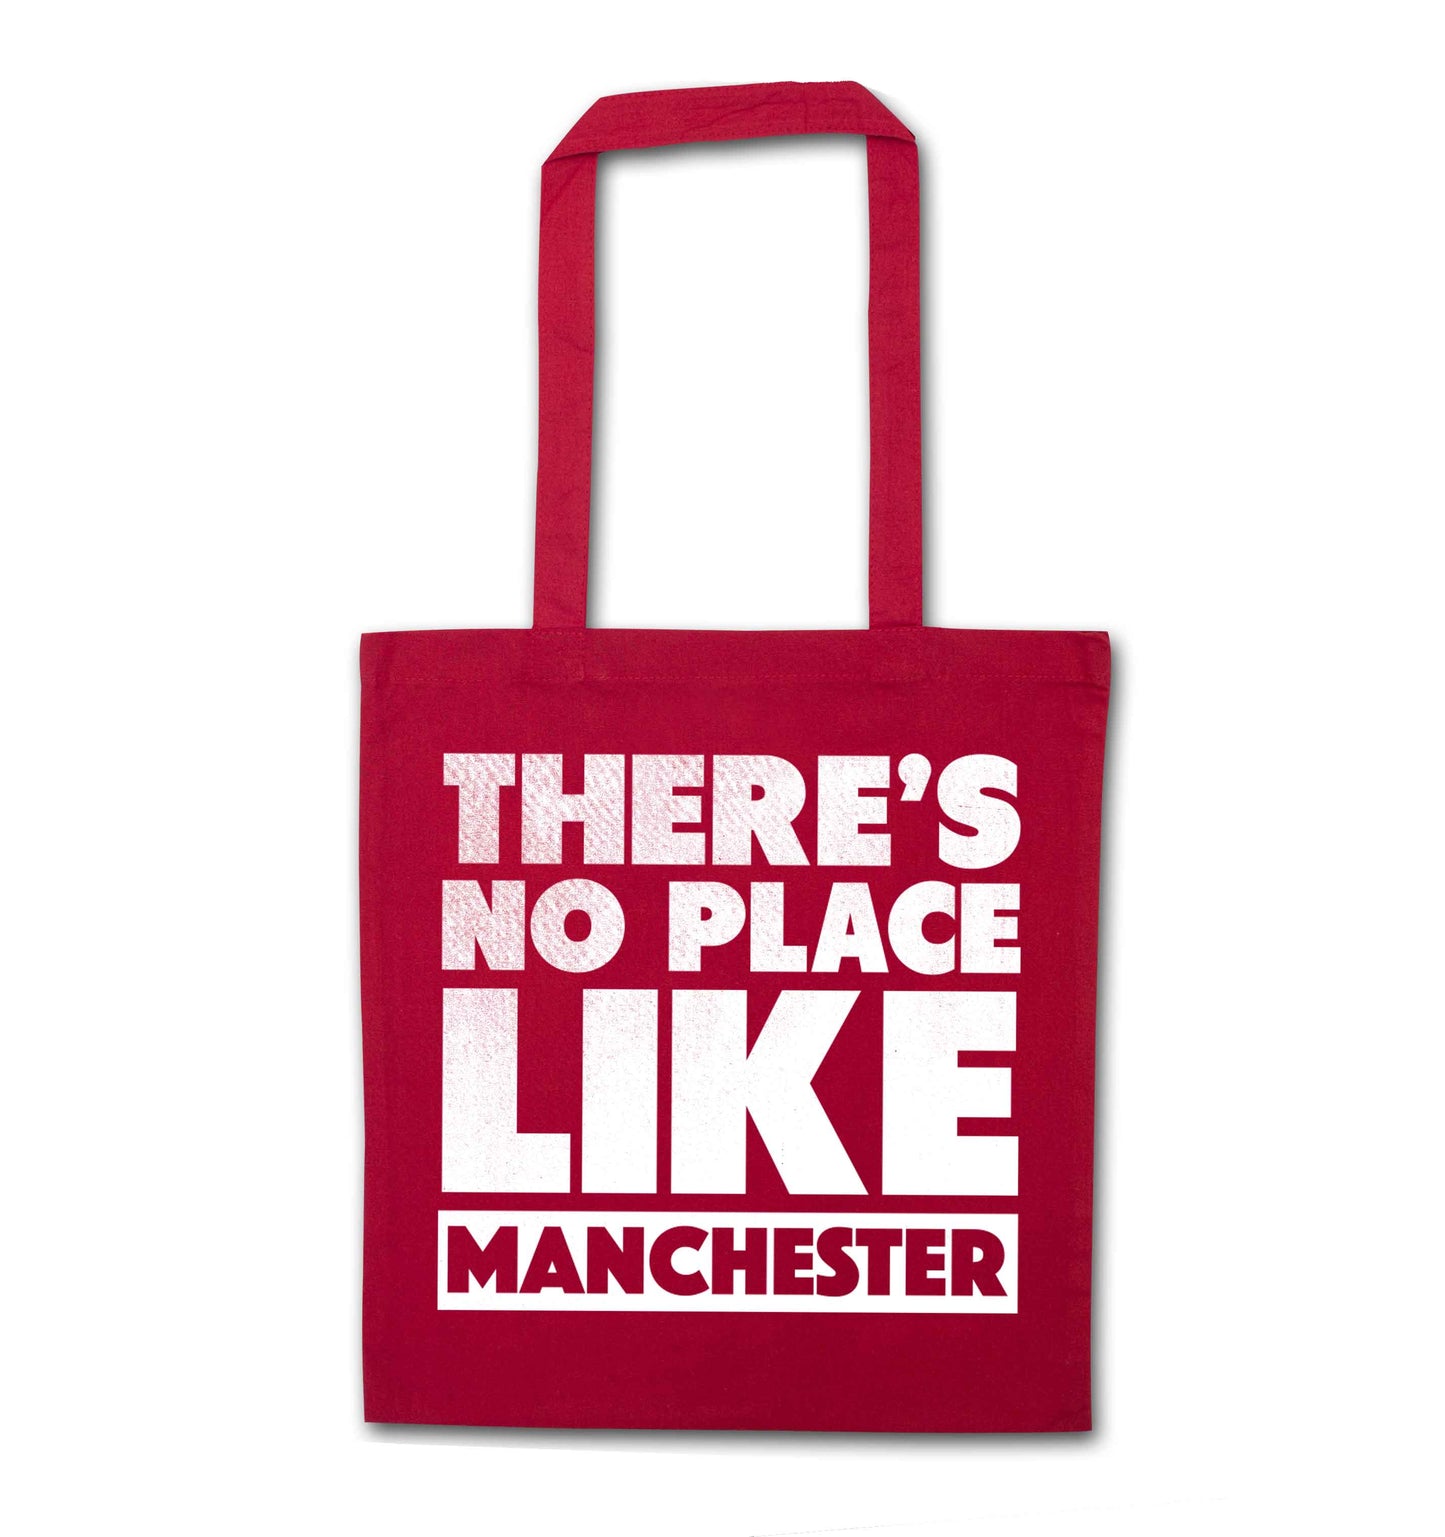 There's no place like Manchester red tote bag